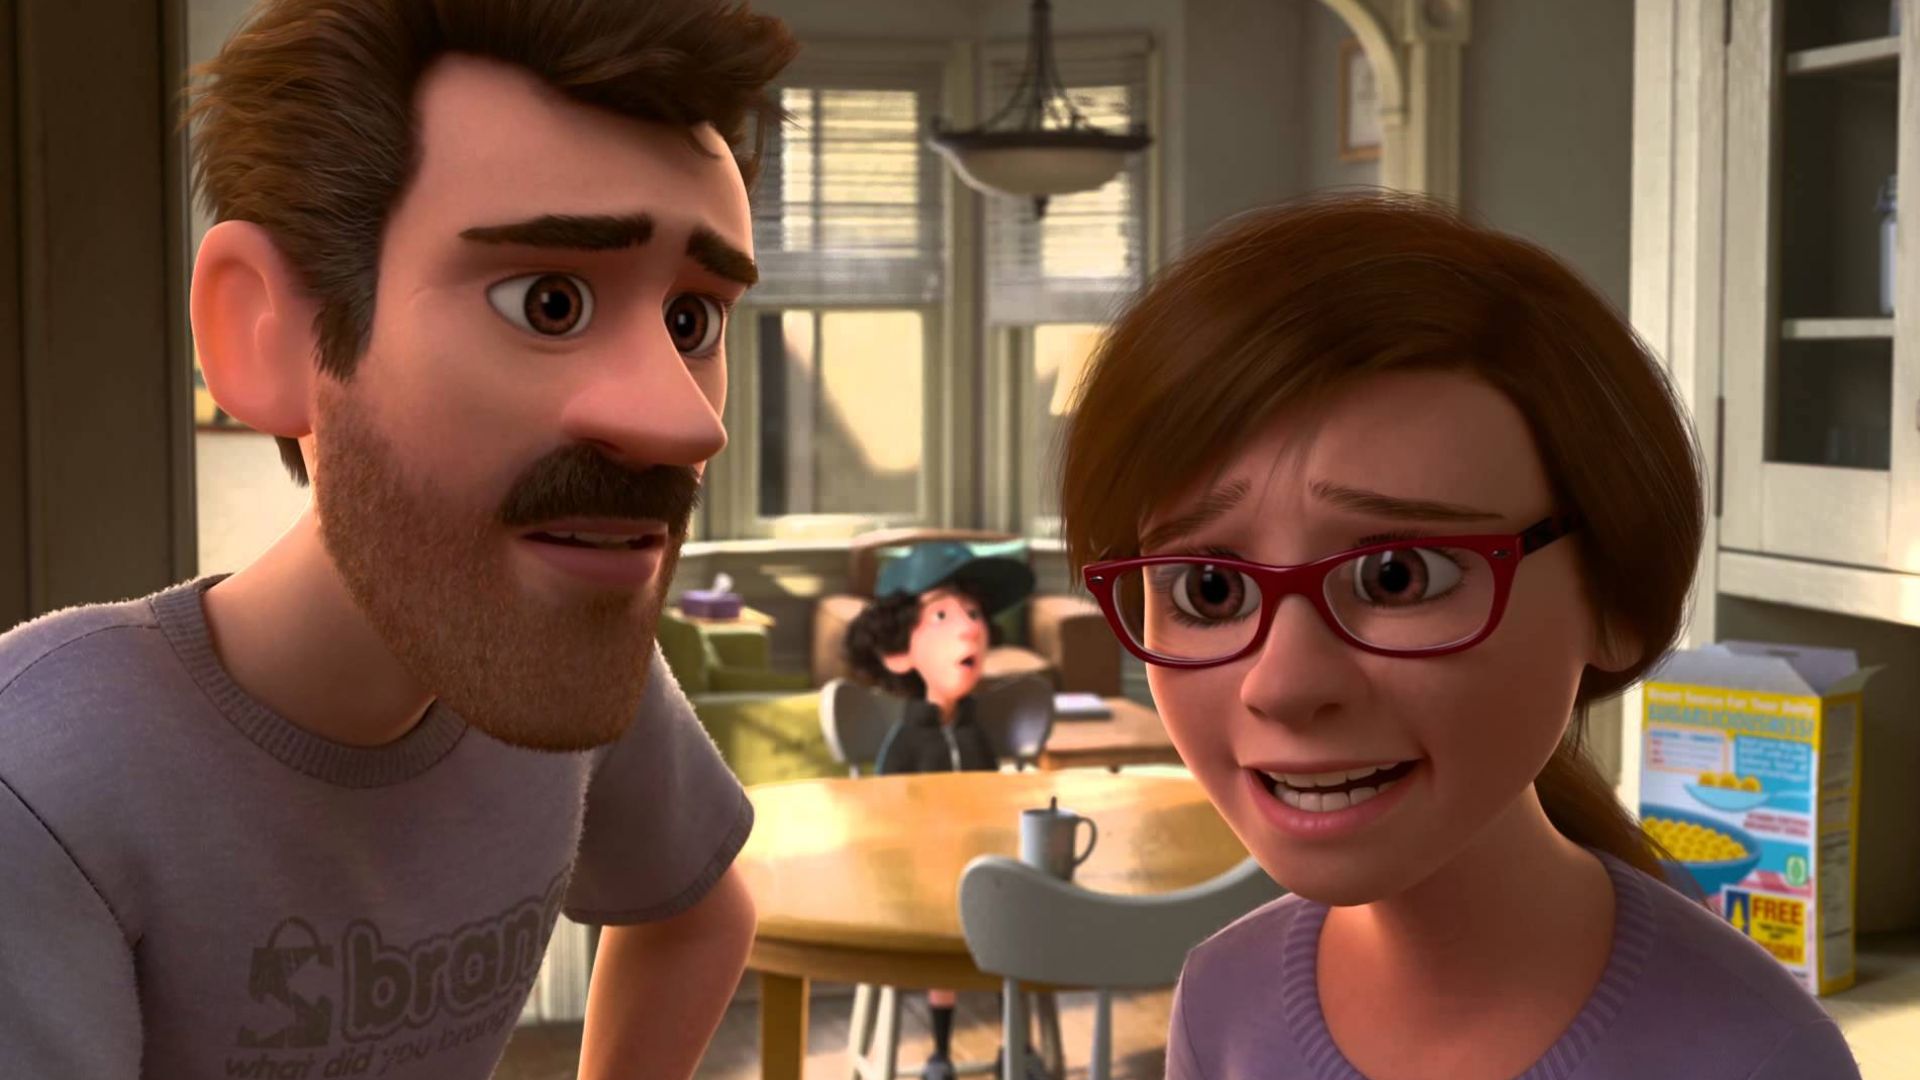 First Clip From Pixar’s &#039;Inside Out&#039; Short Film &#039;Riley’s